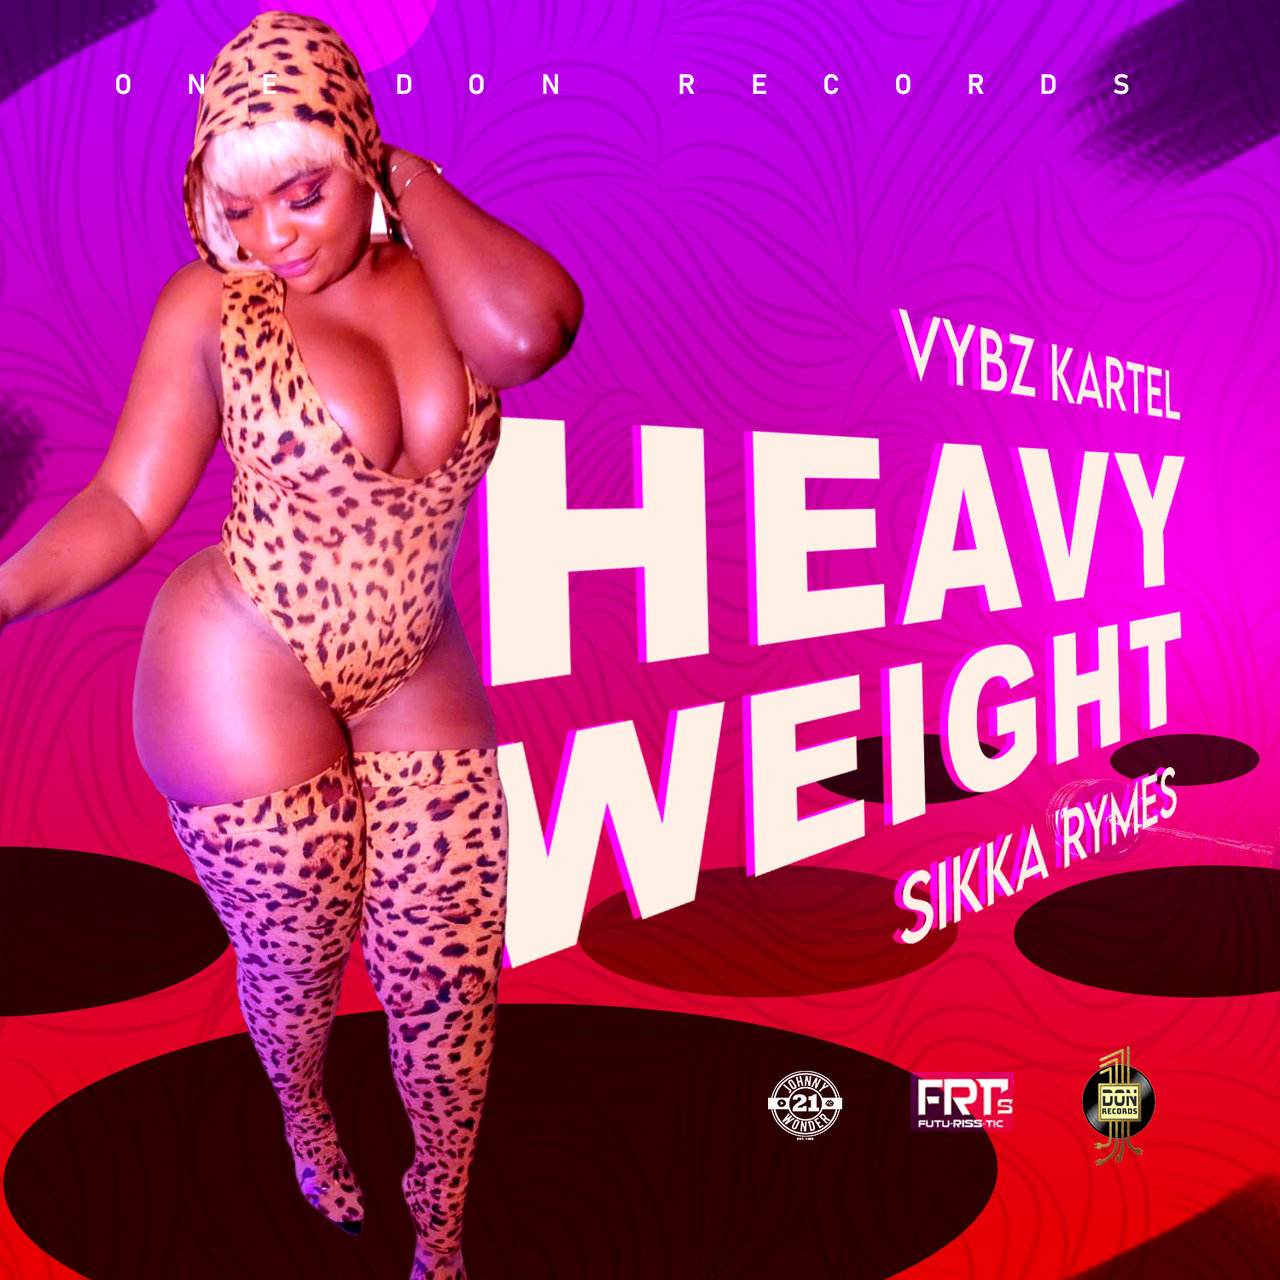 Vybz Kartel - Heavy Weight (ft. Sikka Rymes) (Cover)